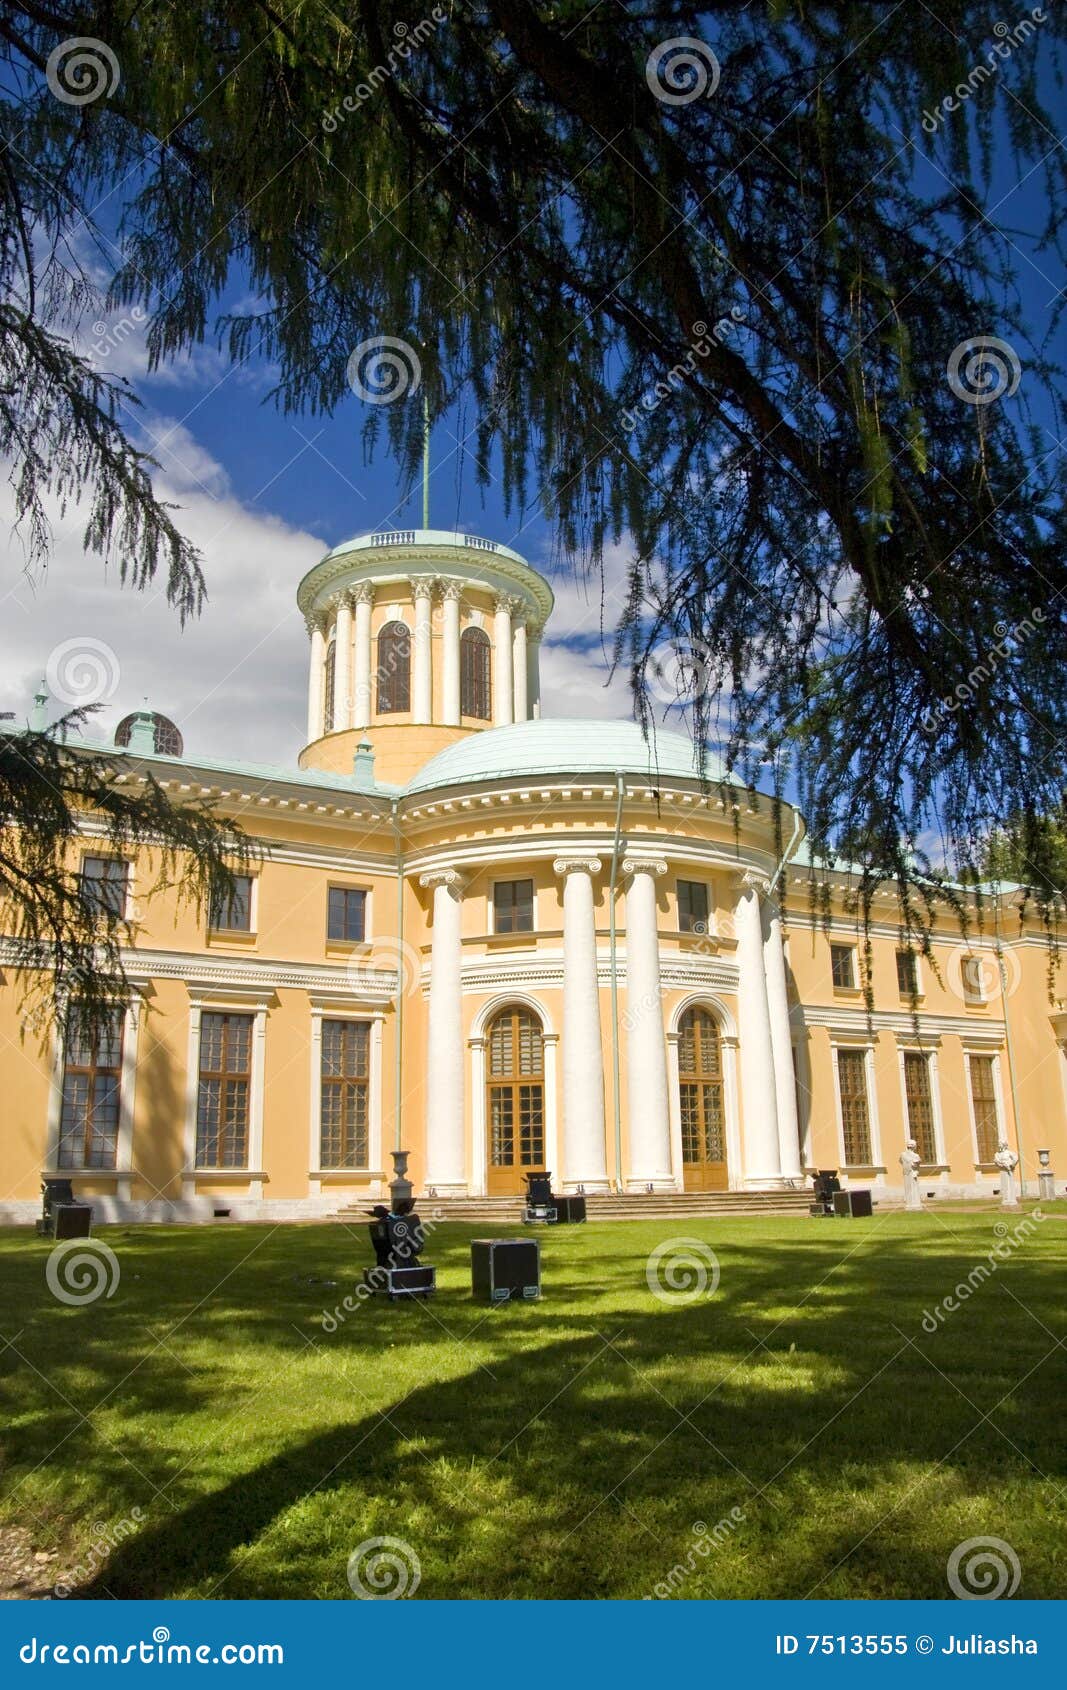 The Palace In Arkhangelskoye Stock Image - Image of facade, journey ...